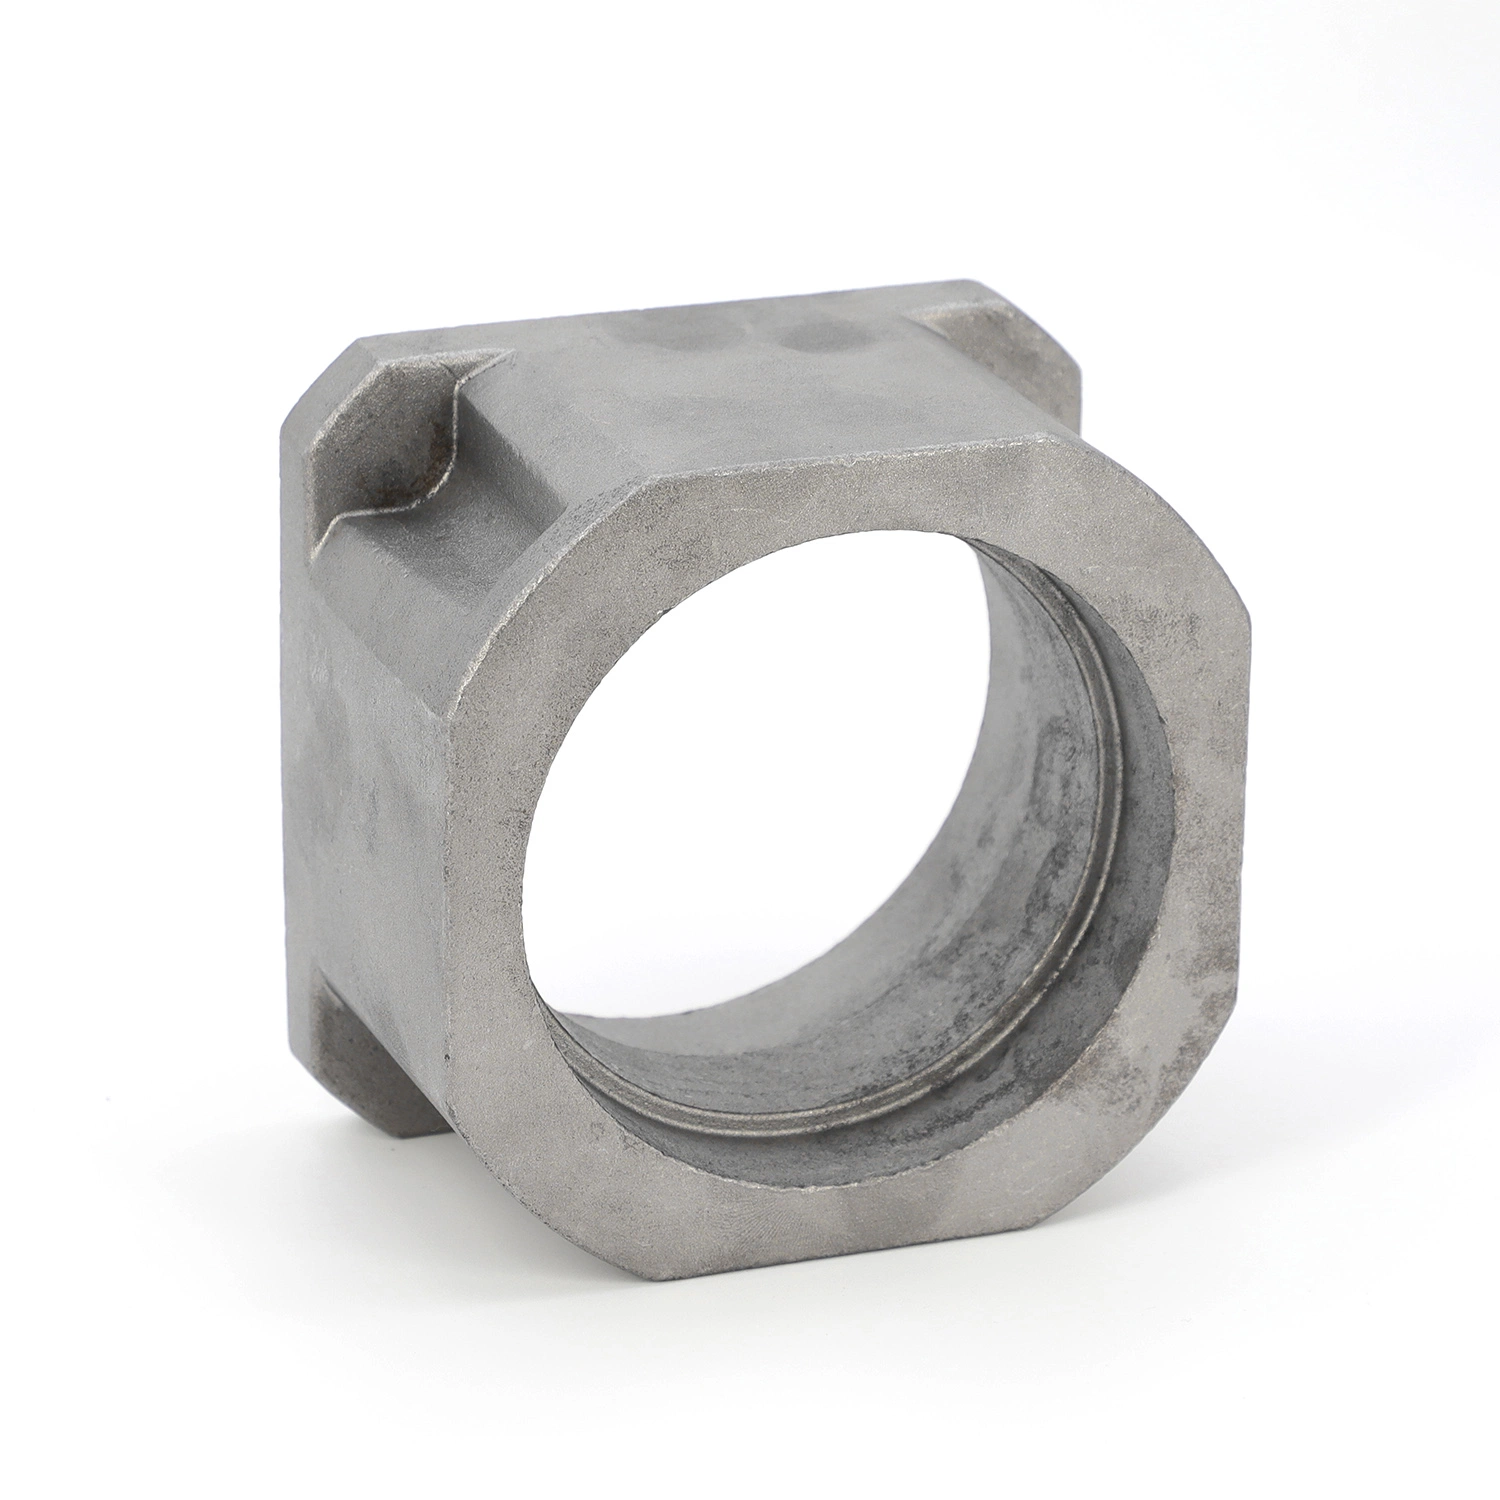 OEM Stainless Steel Investment Casting Engineering Construction Machinery Hardware